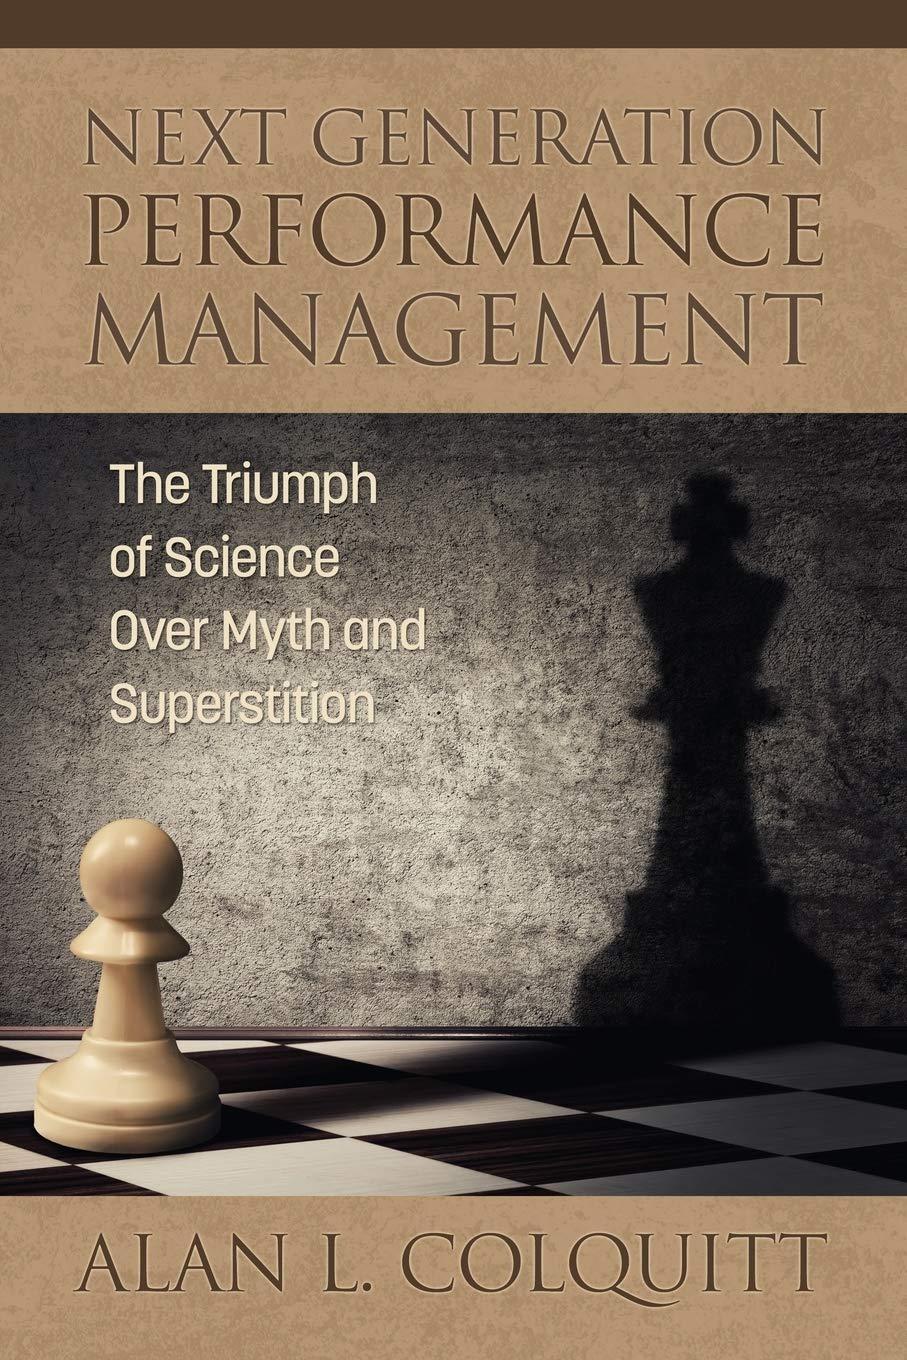 next generation performance management the triumph of science over myth and superstition 1st edition alan l.